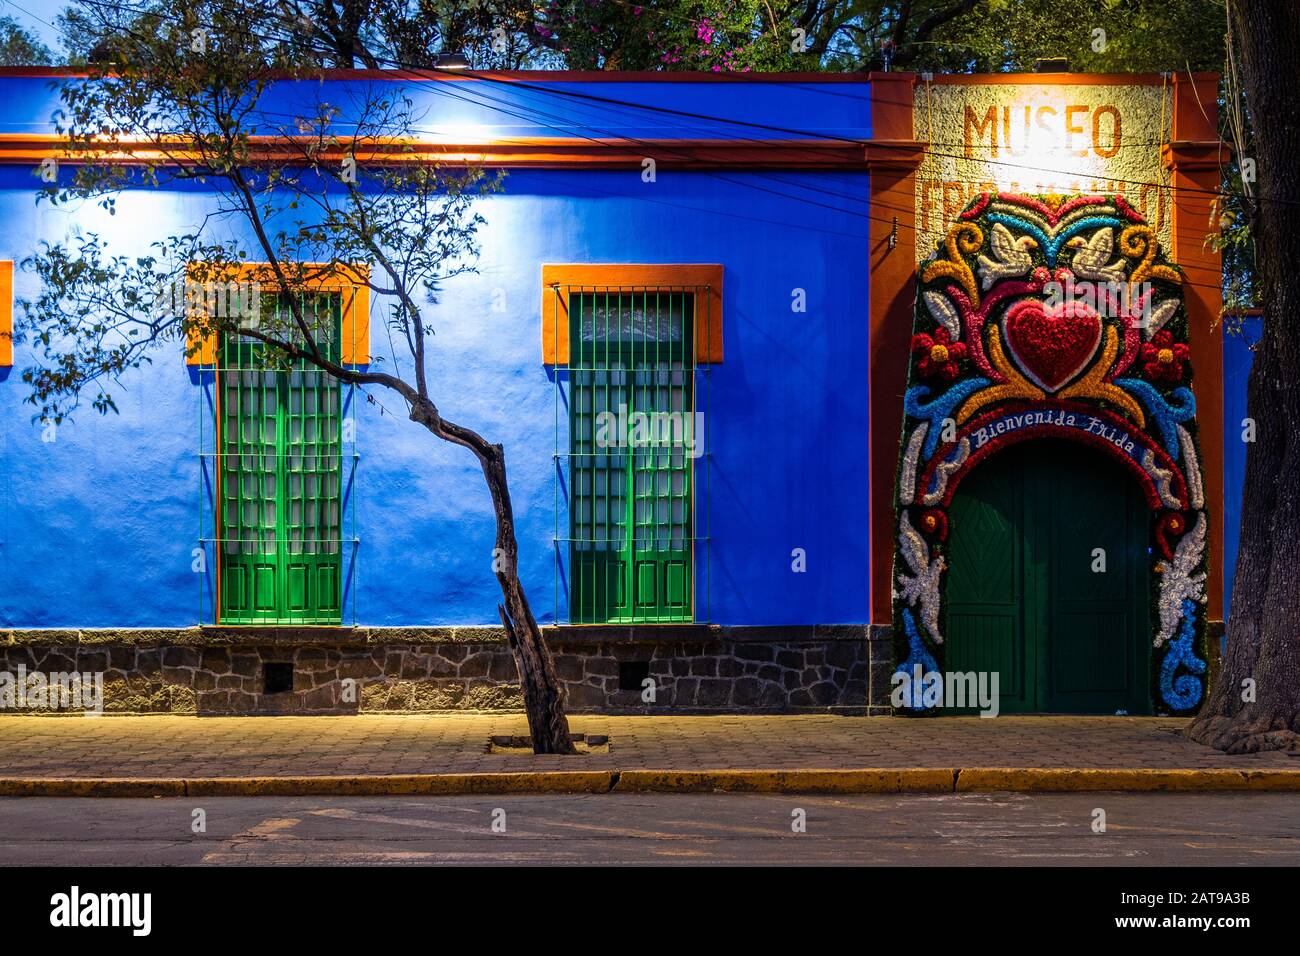 The famous Frida Kahlo Museum, also known as the Casa Azul (Blue House) in Mexico City, Mexico. Stock Photo